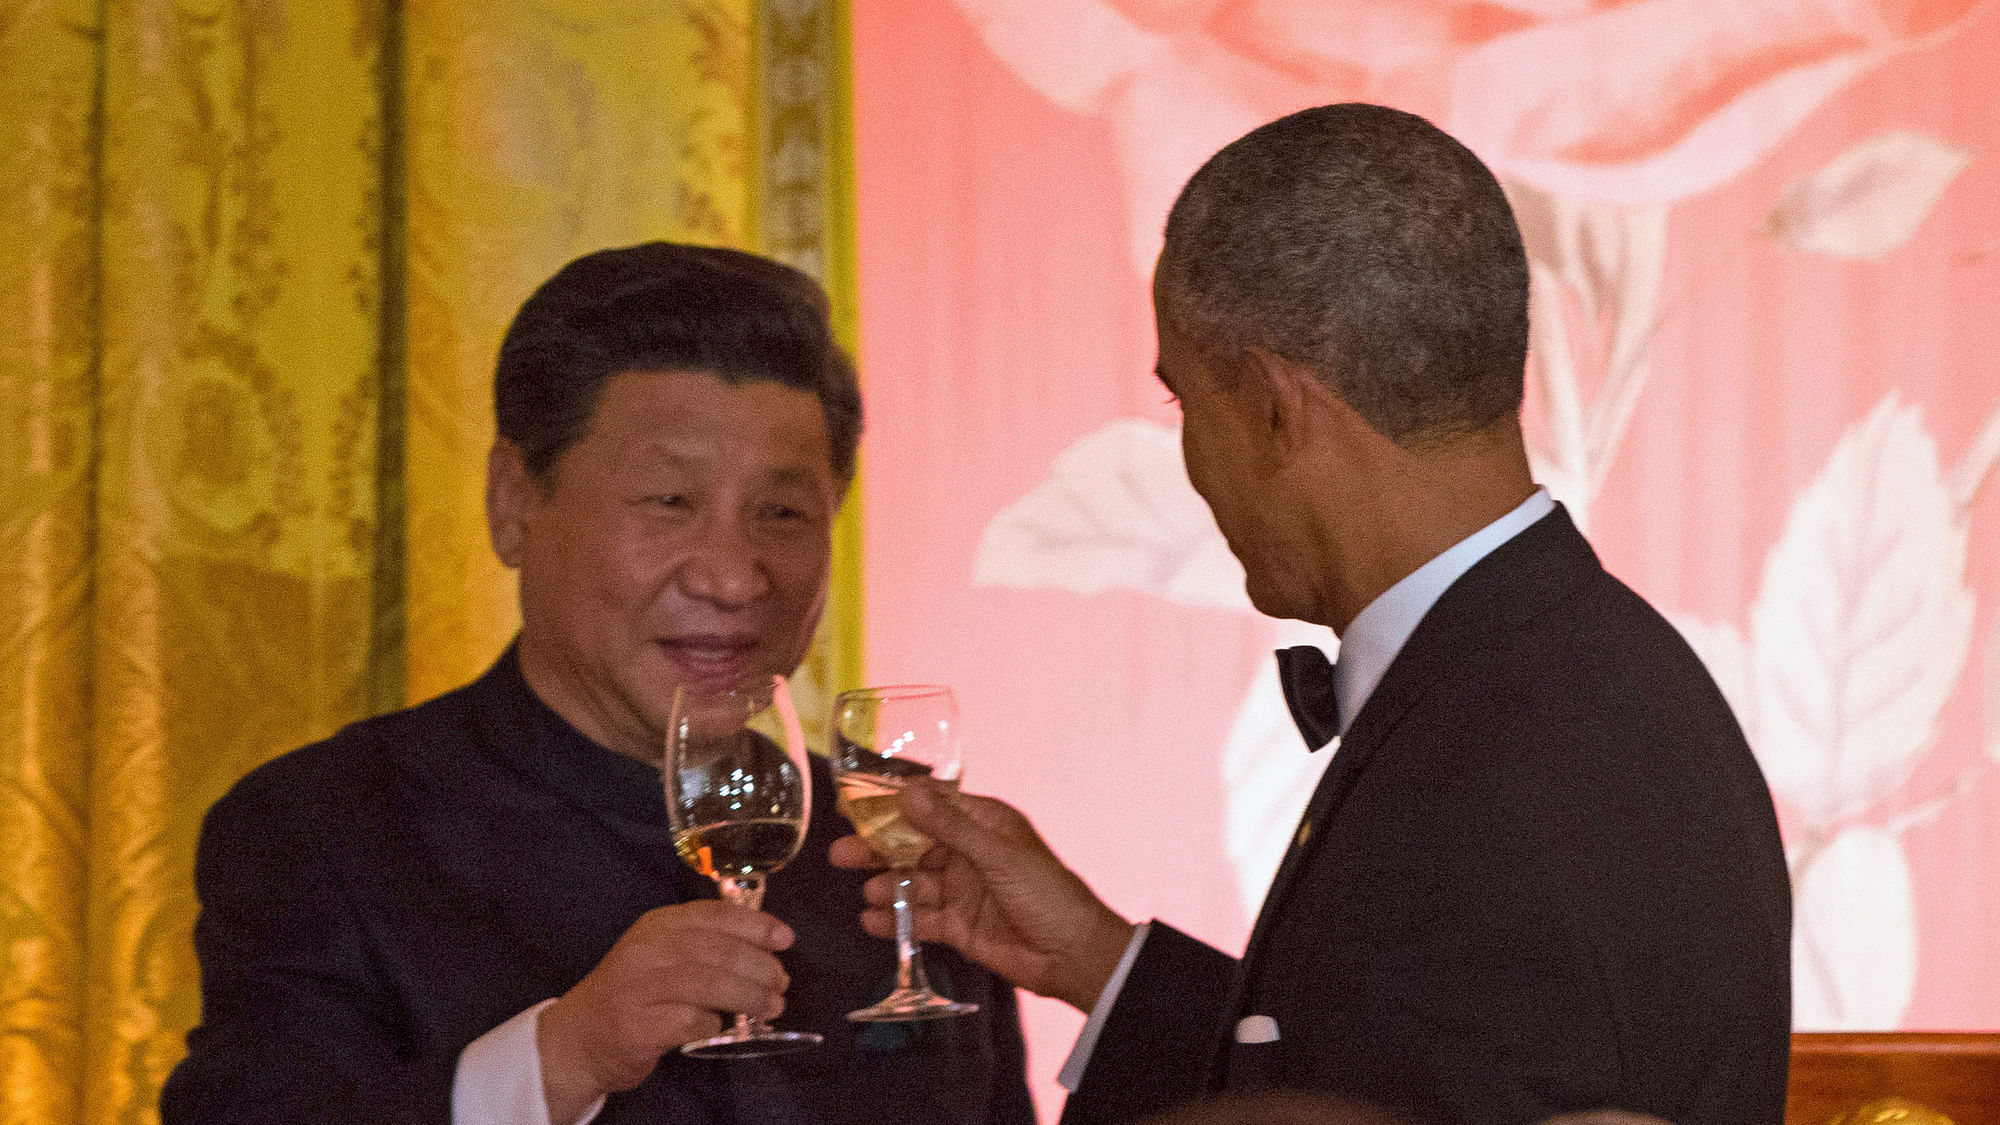 Chinese President Xi Jinping and US President Barack Obama toast during a State Dinner, on Friday, at the White House. (Photo: AP)